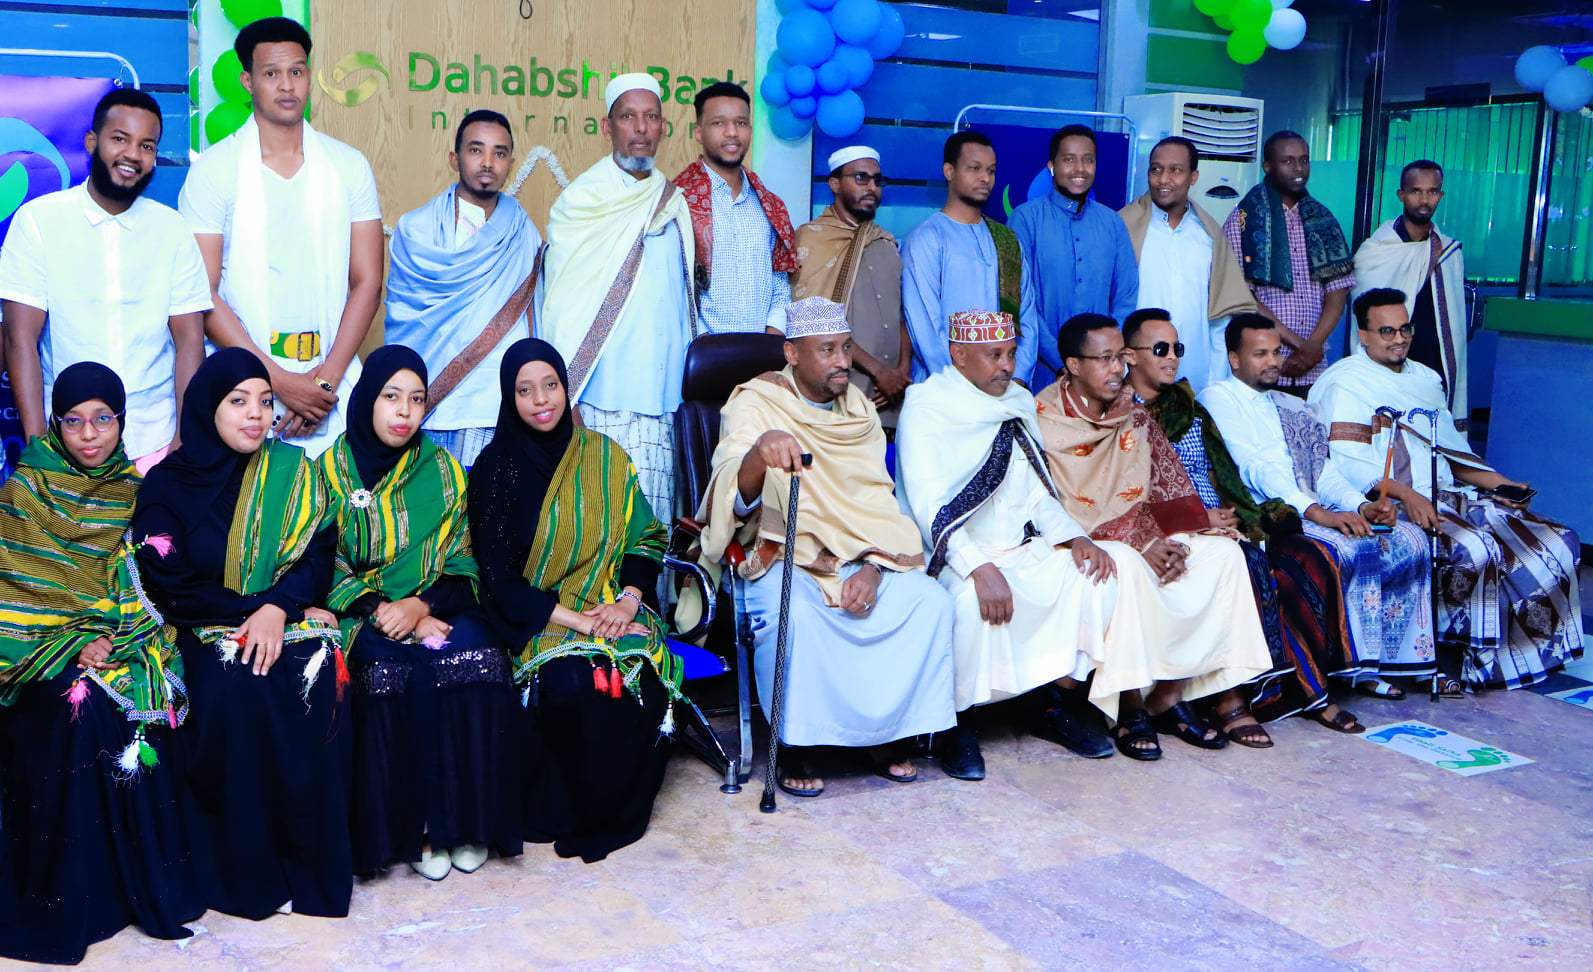 Dahabshil Bank International celebrates culture day to conclude customer service week 2020